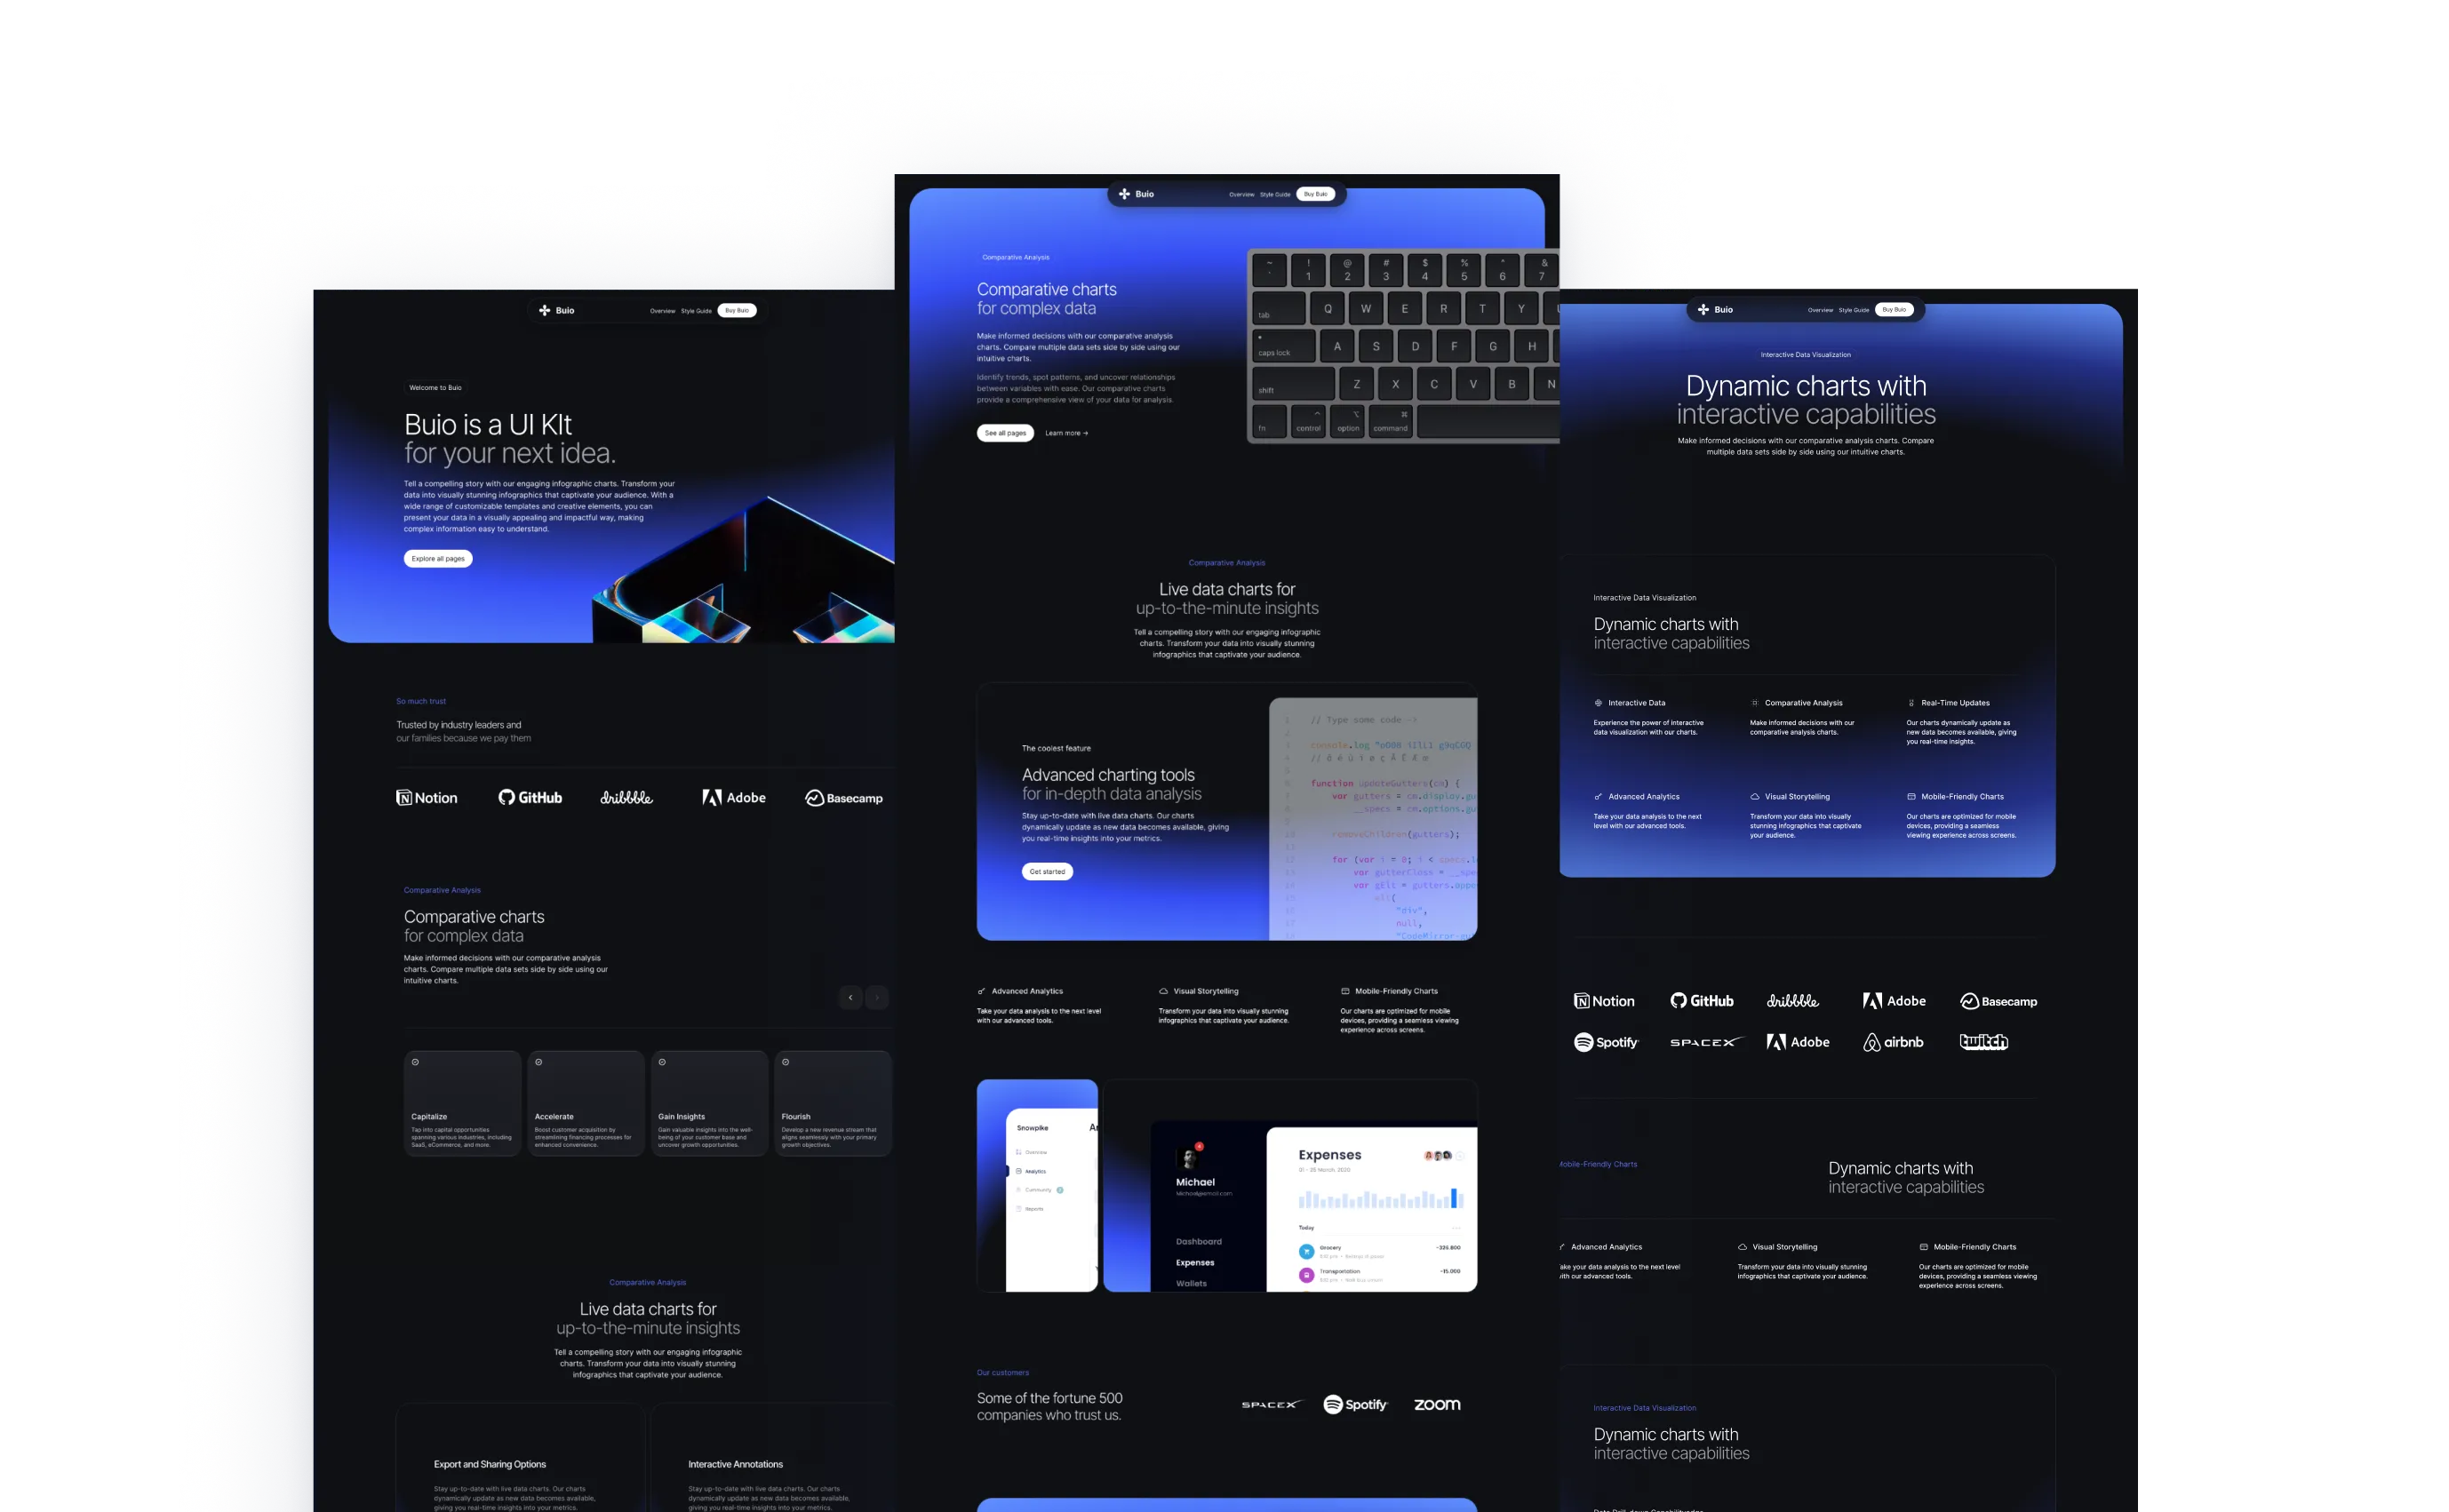 Buio theme display, featuring a sleek dark mode interface with blue accent colors. The theme highlights dynamic, interactive charts, live data insights, and advanced charting tools for data analysis. Logos of trusted companies like Notion, GitHub, and Adobe showcase industry endorsement.